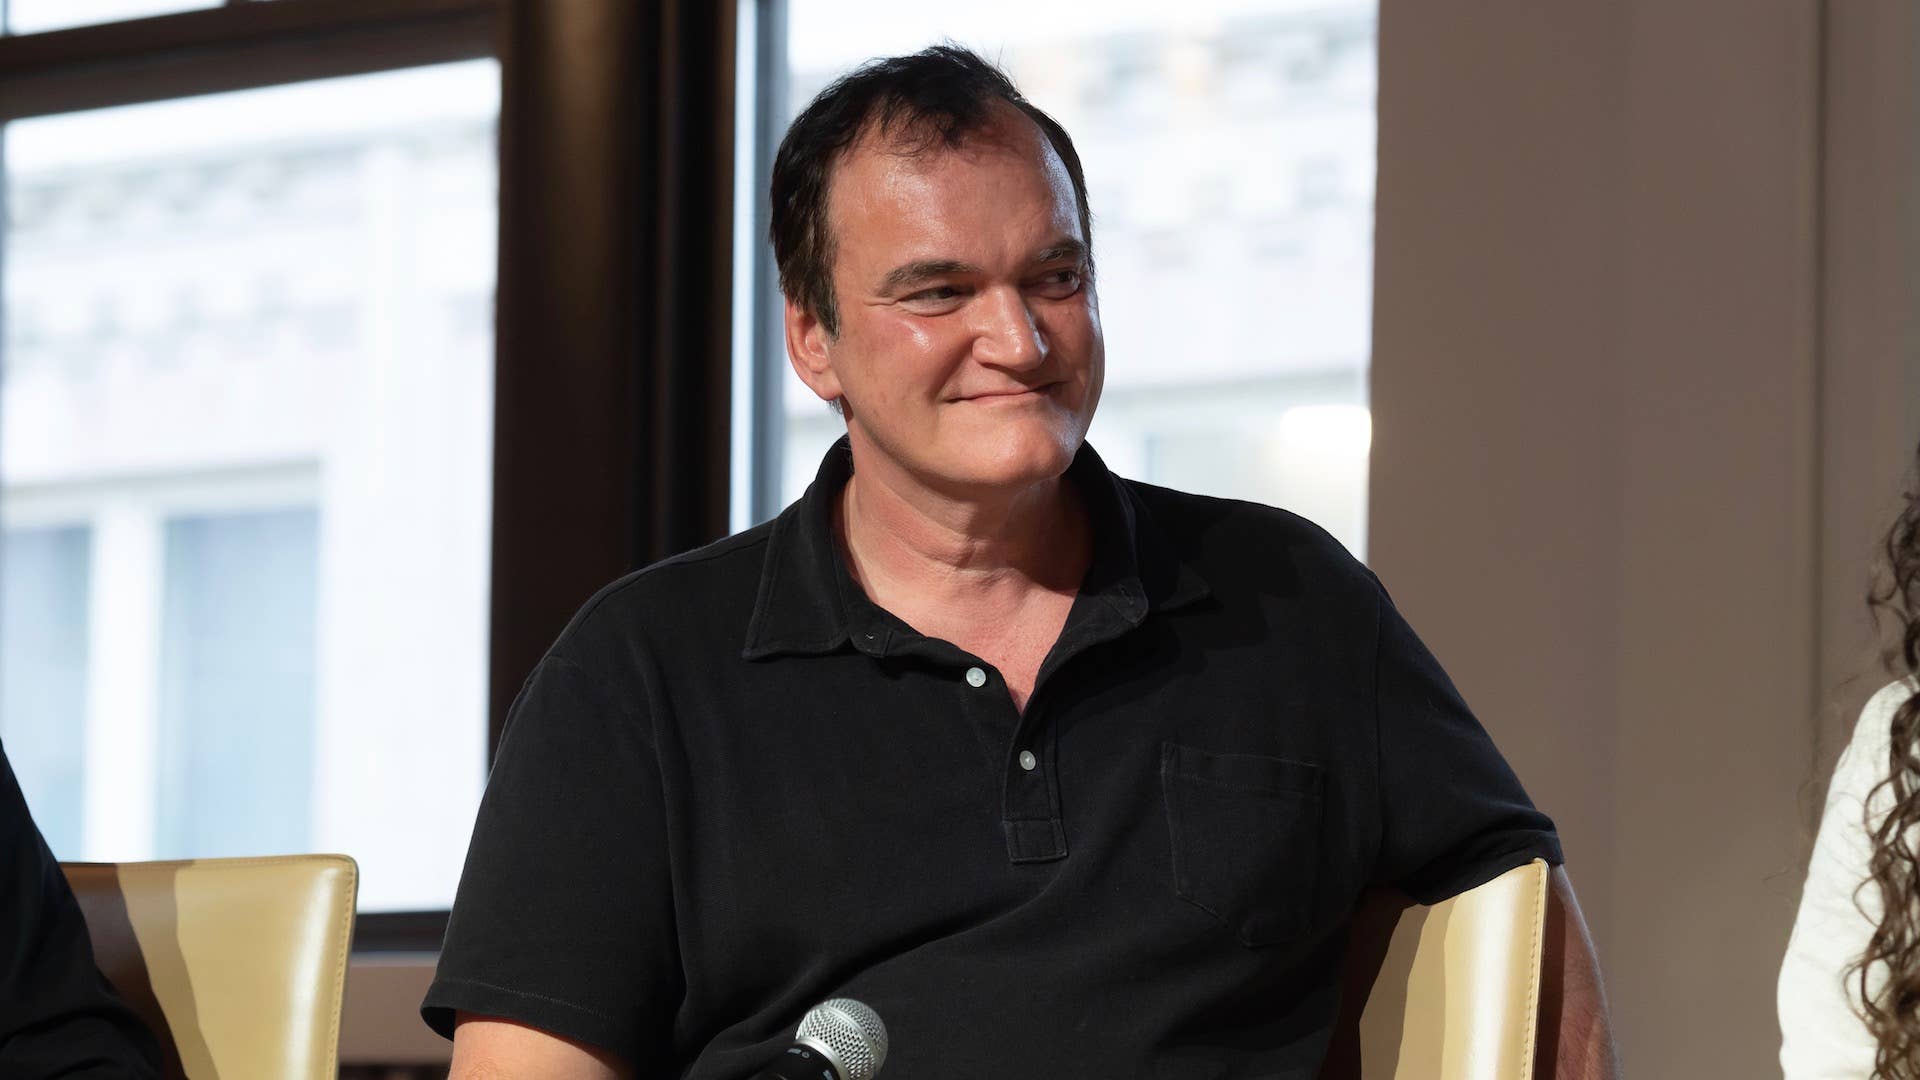 Quentin Tarantino speaks at Secret Network panel discussion during NFT.NYC